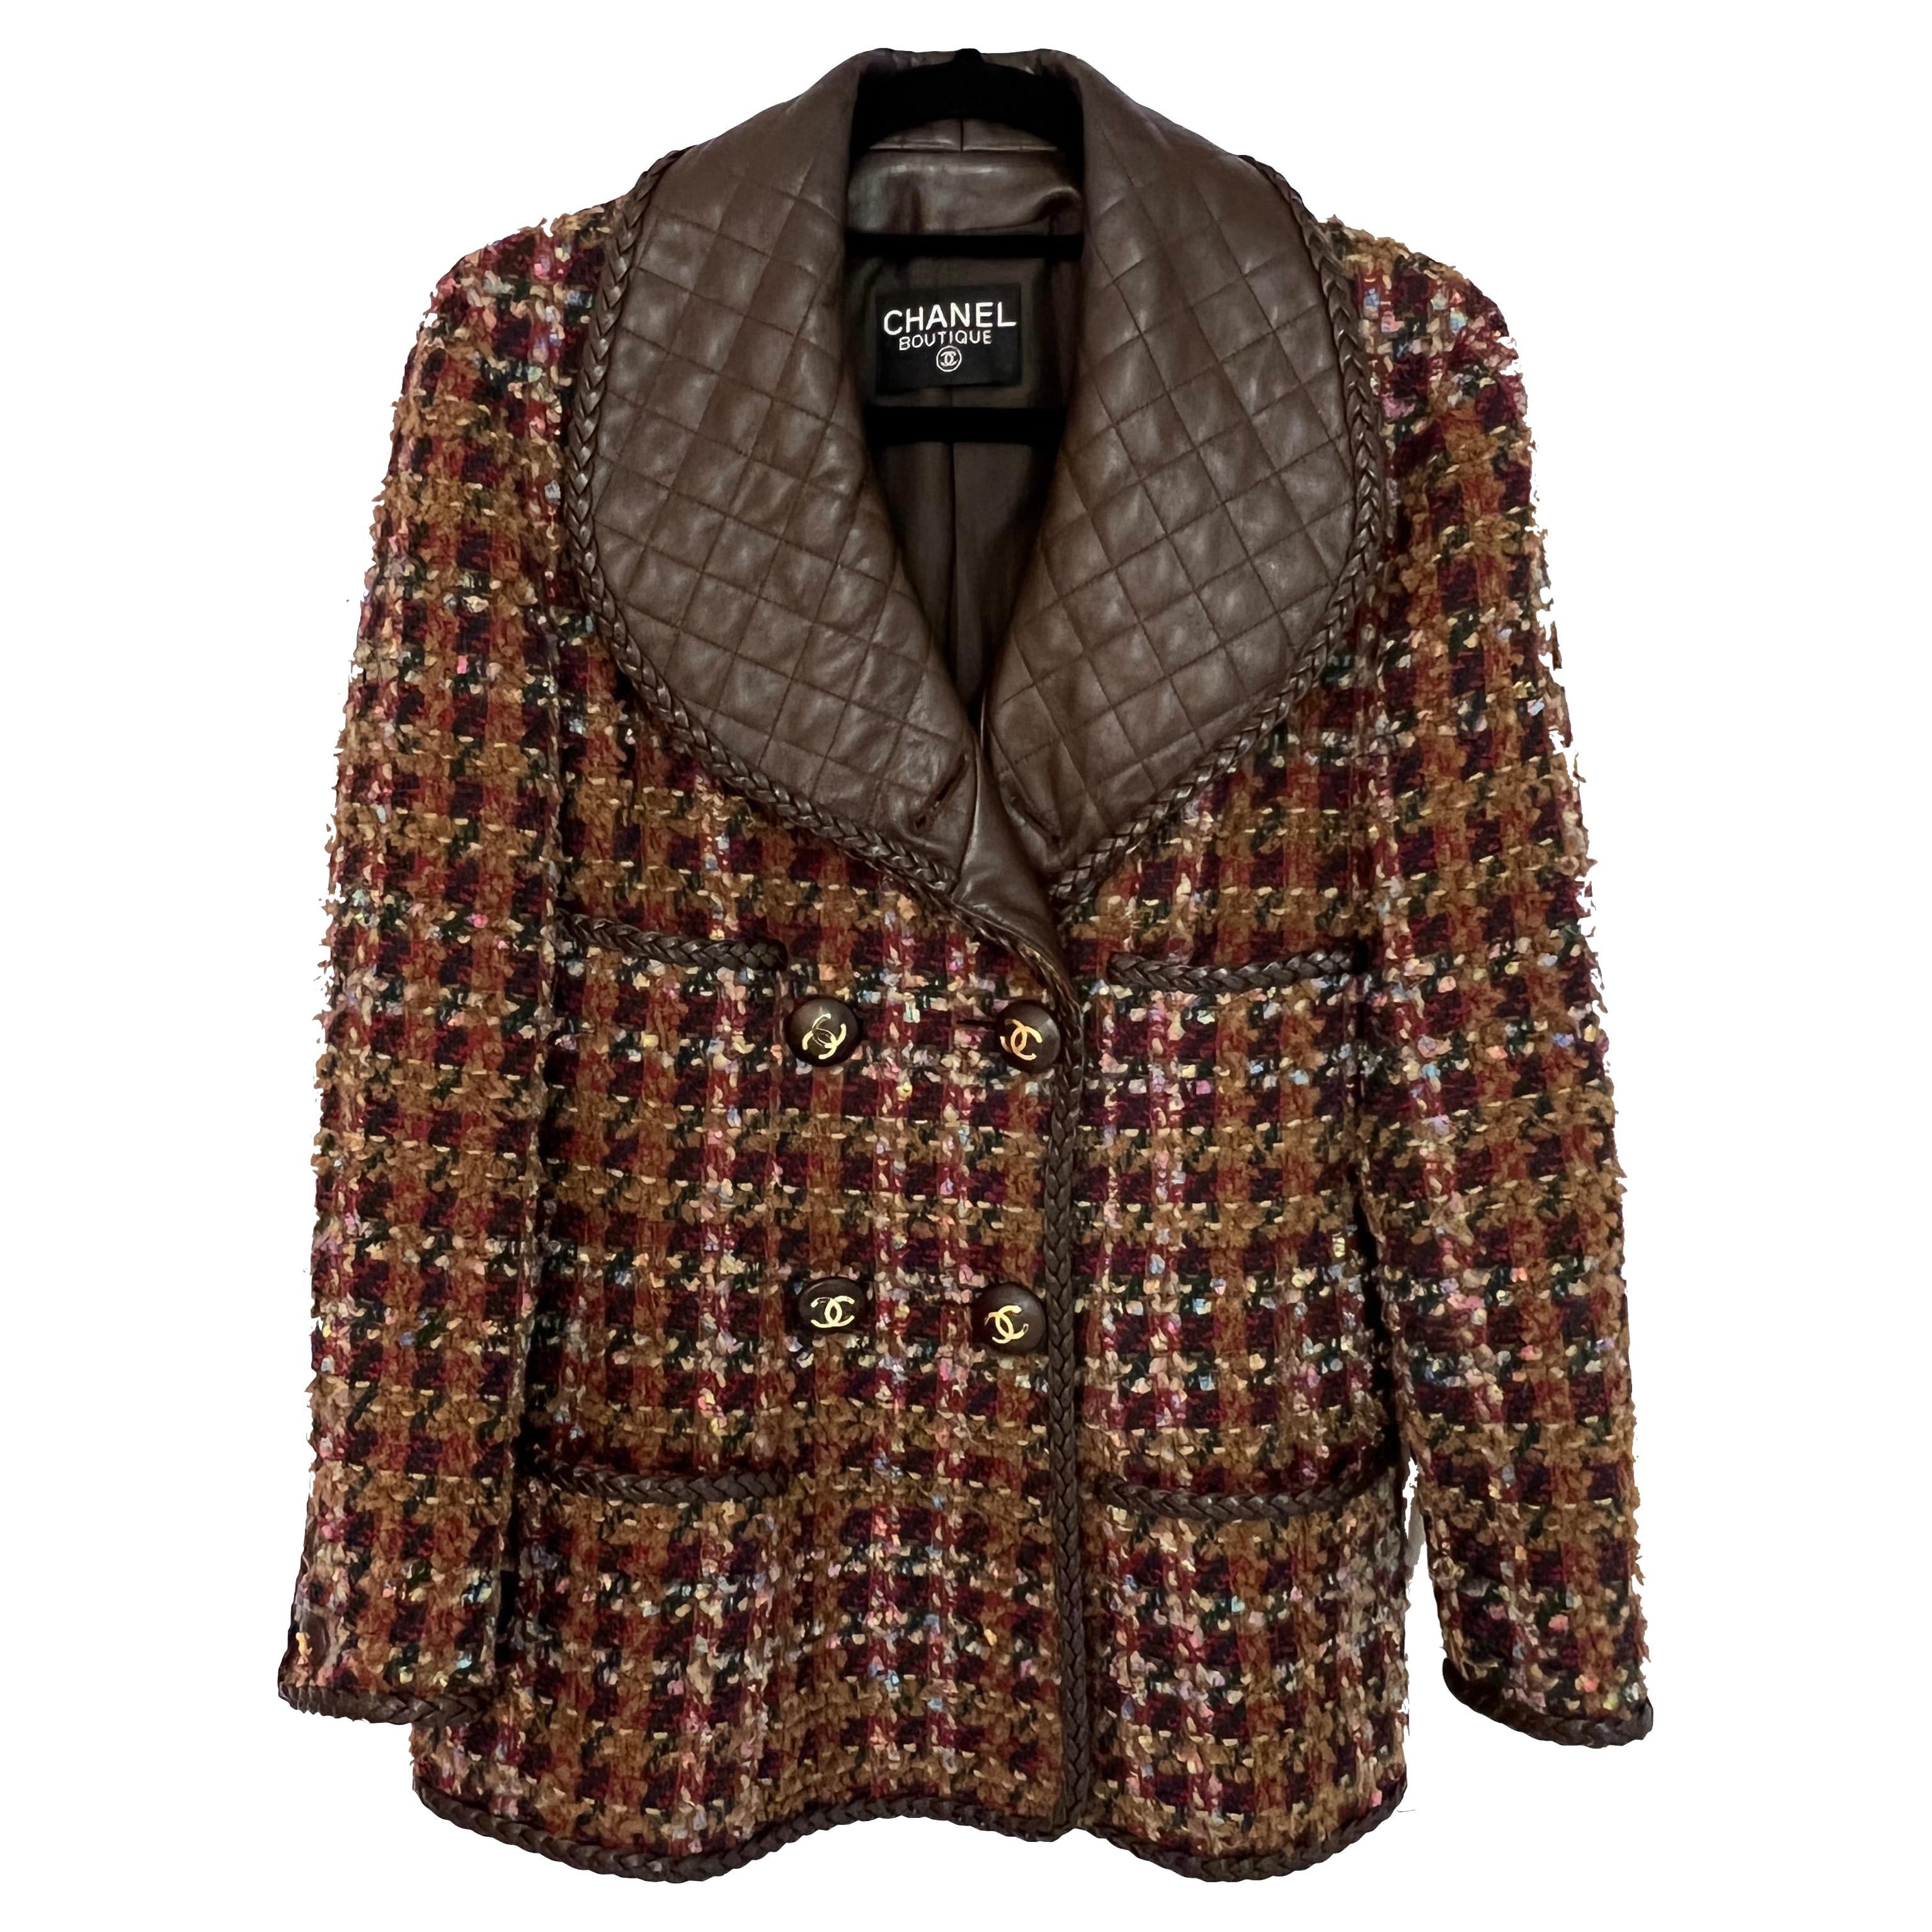 CHANEL Jacket in Brown Tweed and Leather Collar Size 40fr